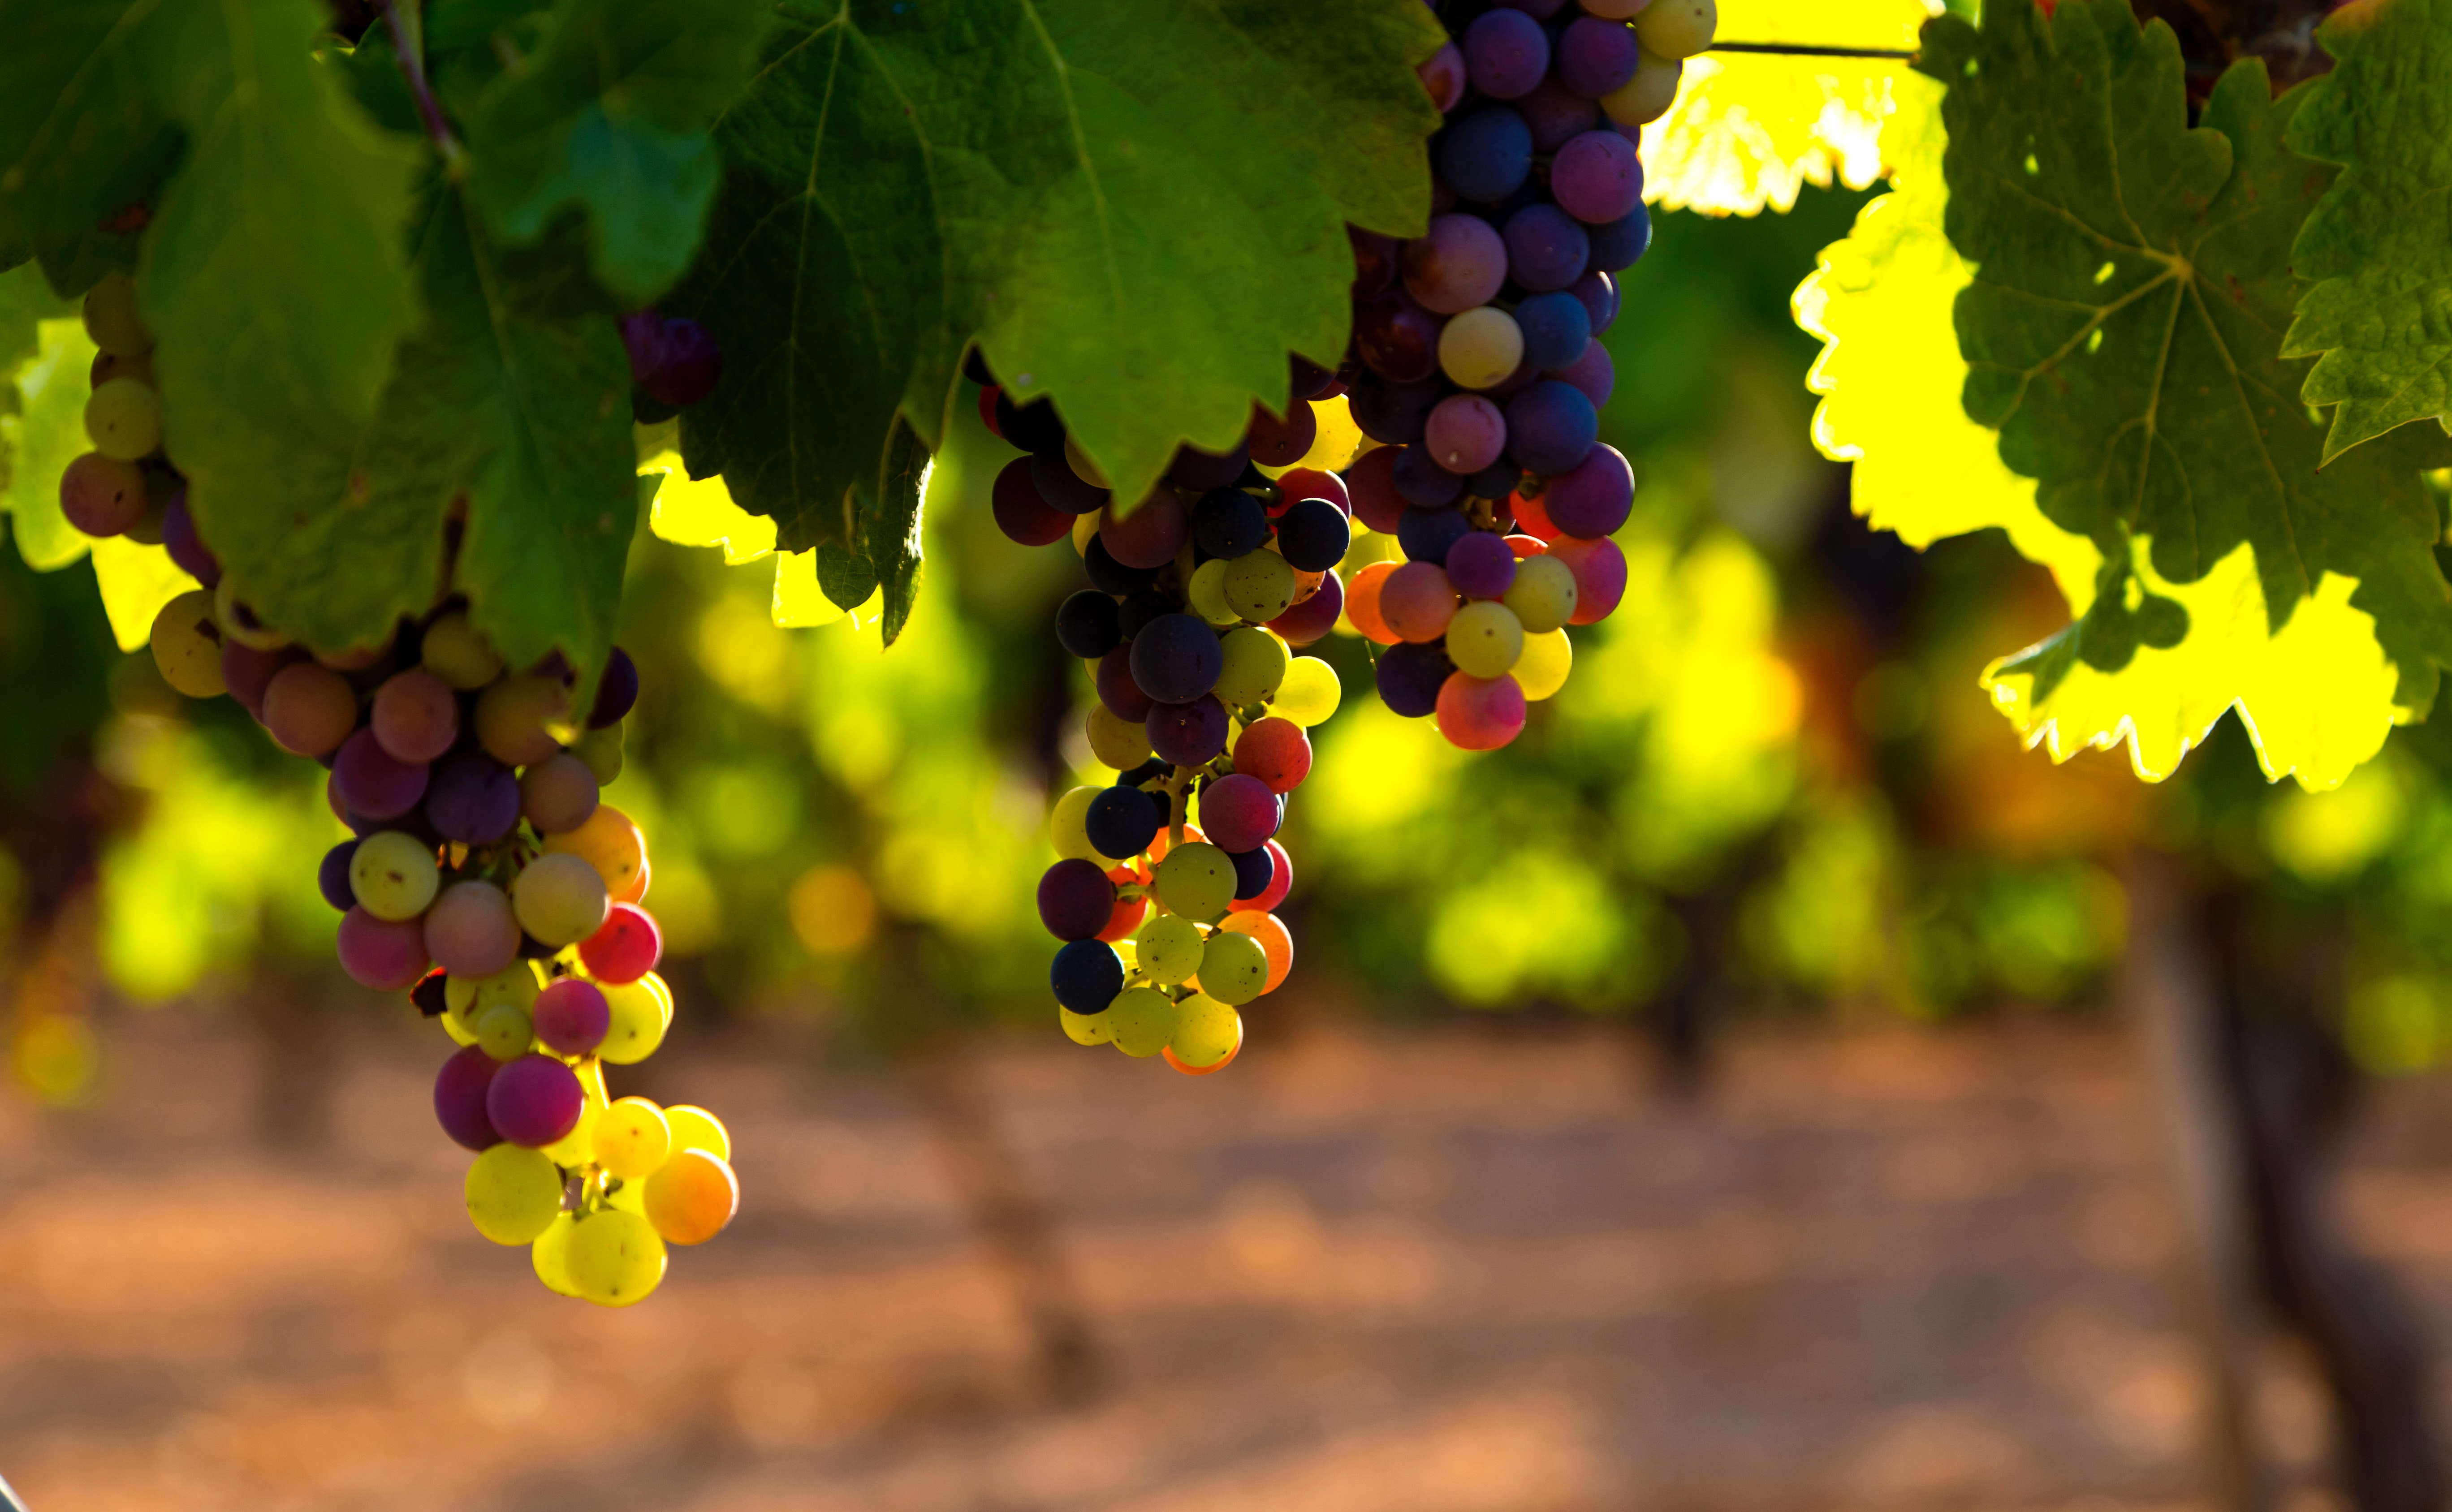 global warming impacts the wine industry